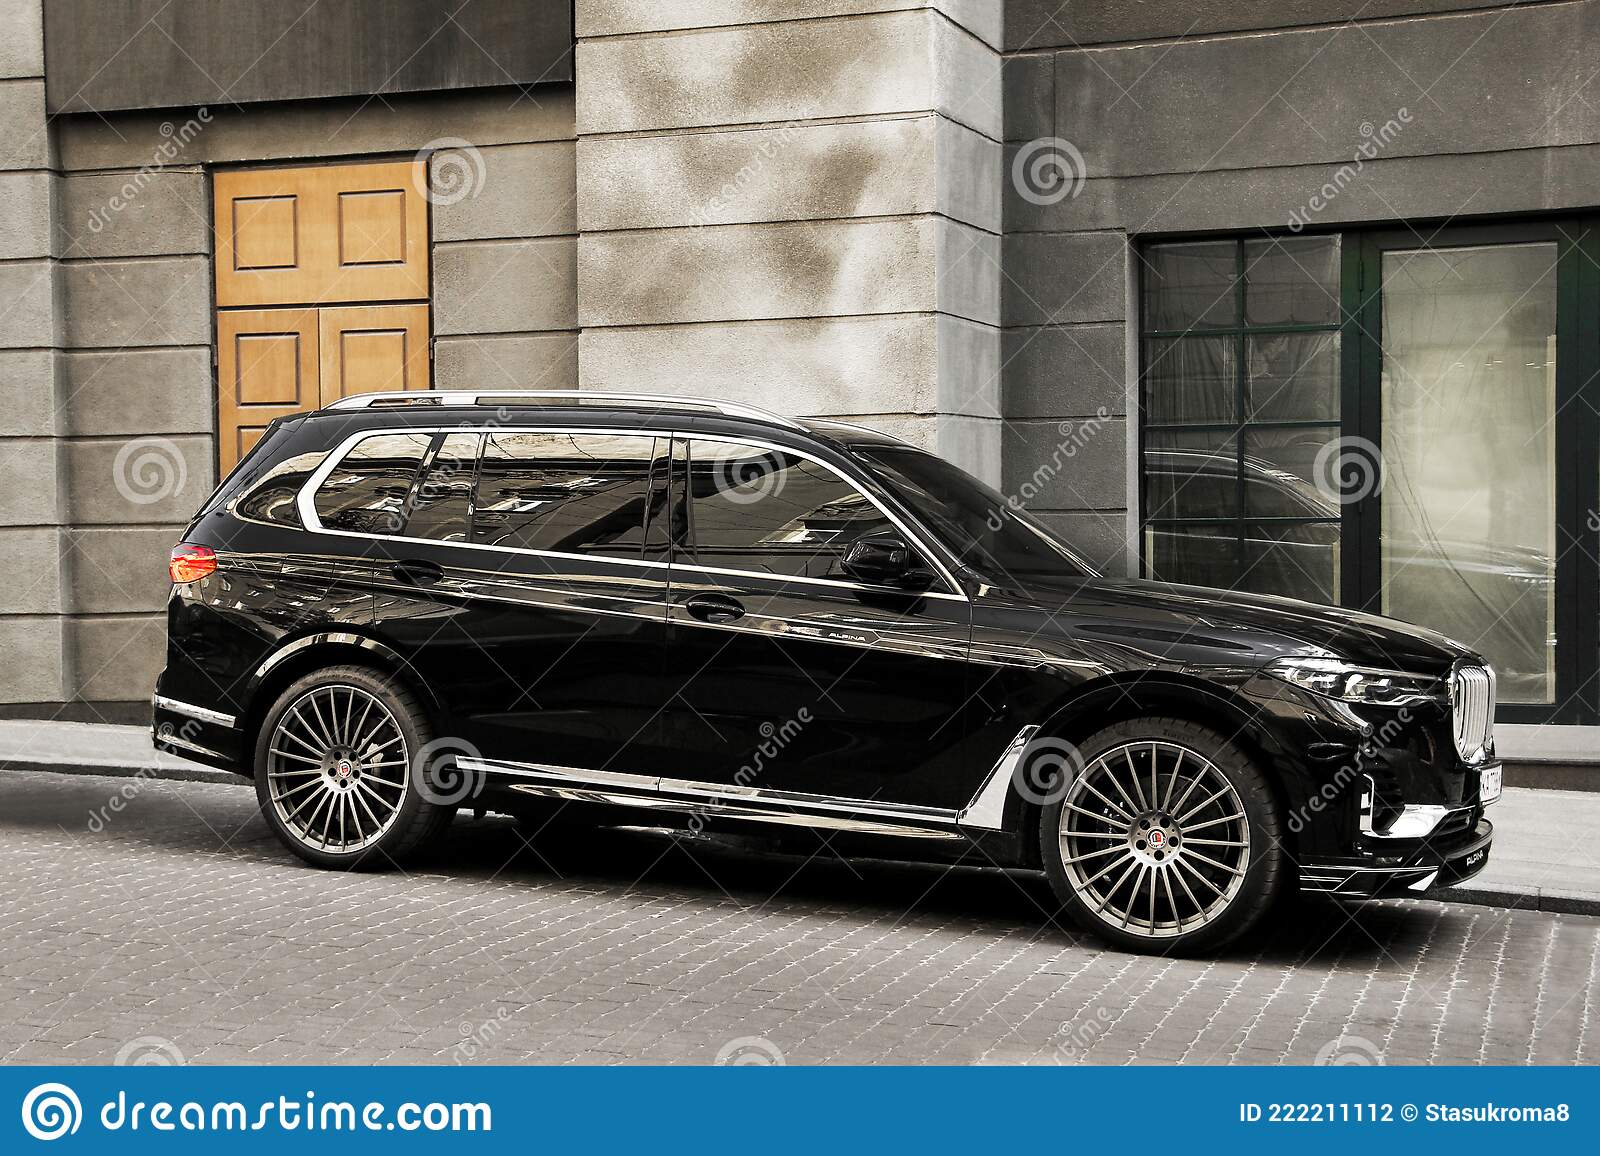 Kiev, Ukraine - May 22, 2021: Luxury SUV BMW Alpina XB7 Parked in the City  Editorial Photography - Image of transport, model: 222211112